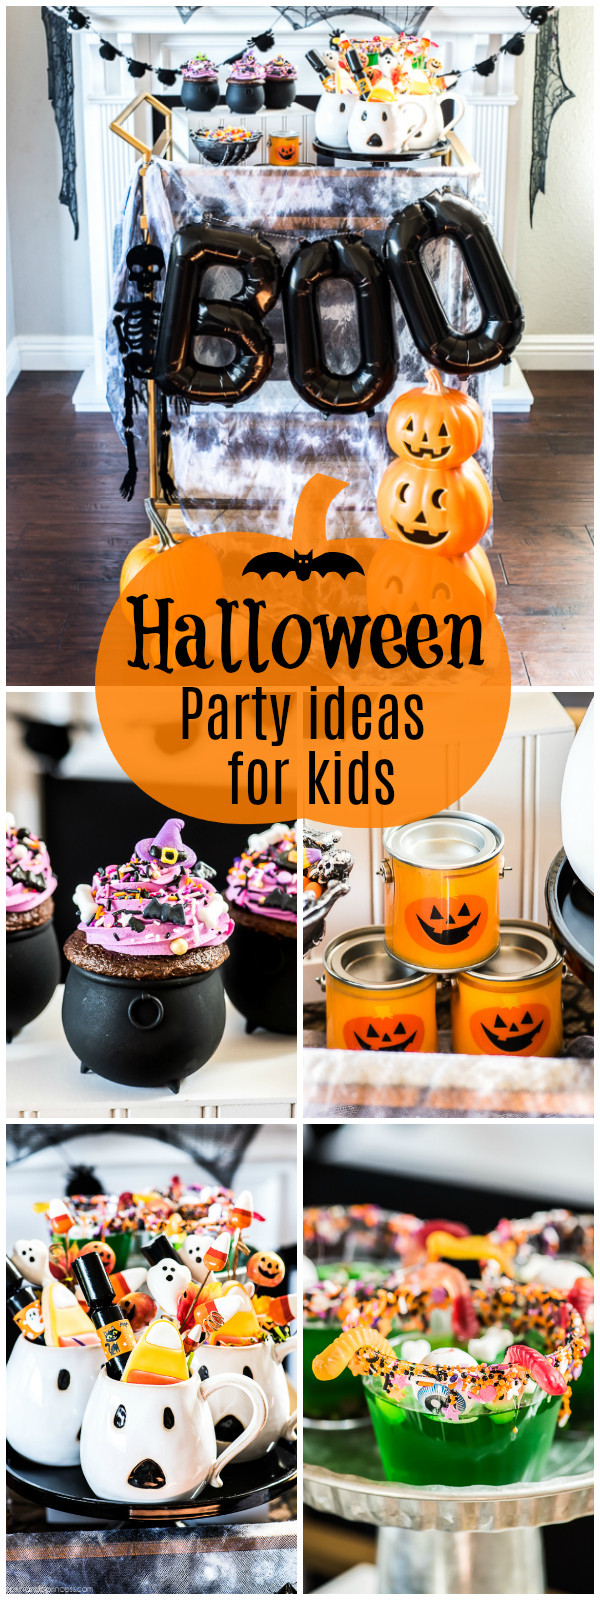 Halloween Party Ideas For Teenagers
 Halloween Party Ideas Kids